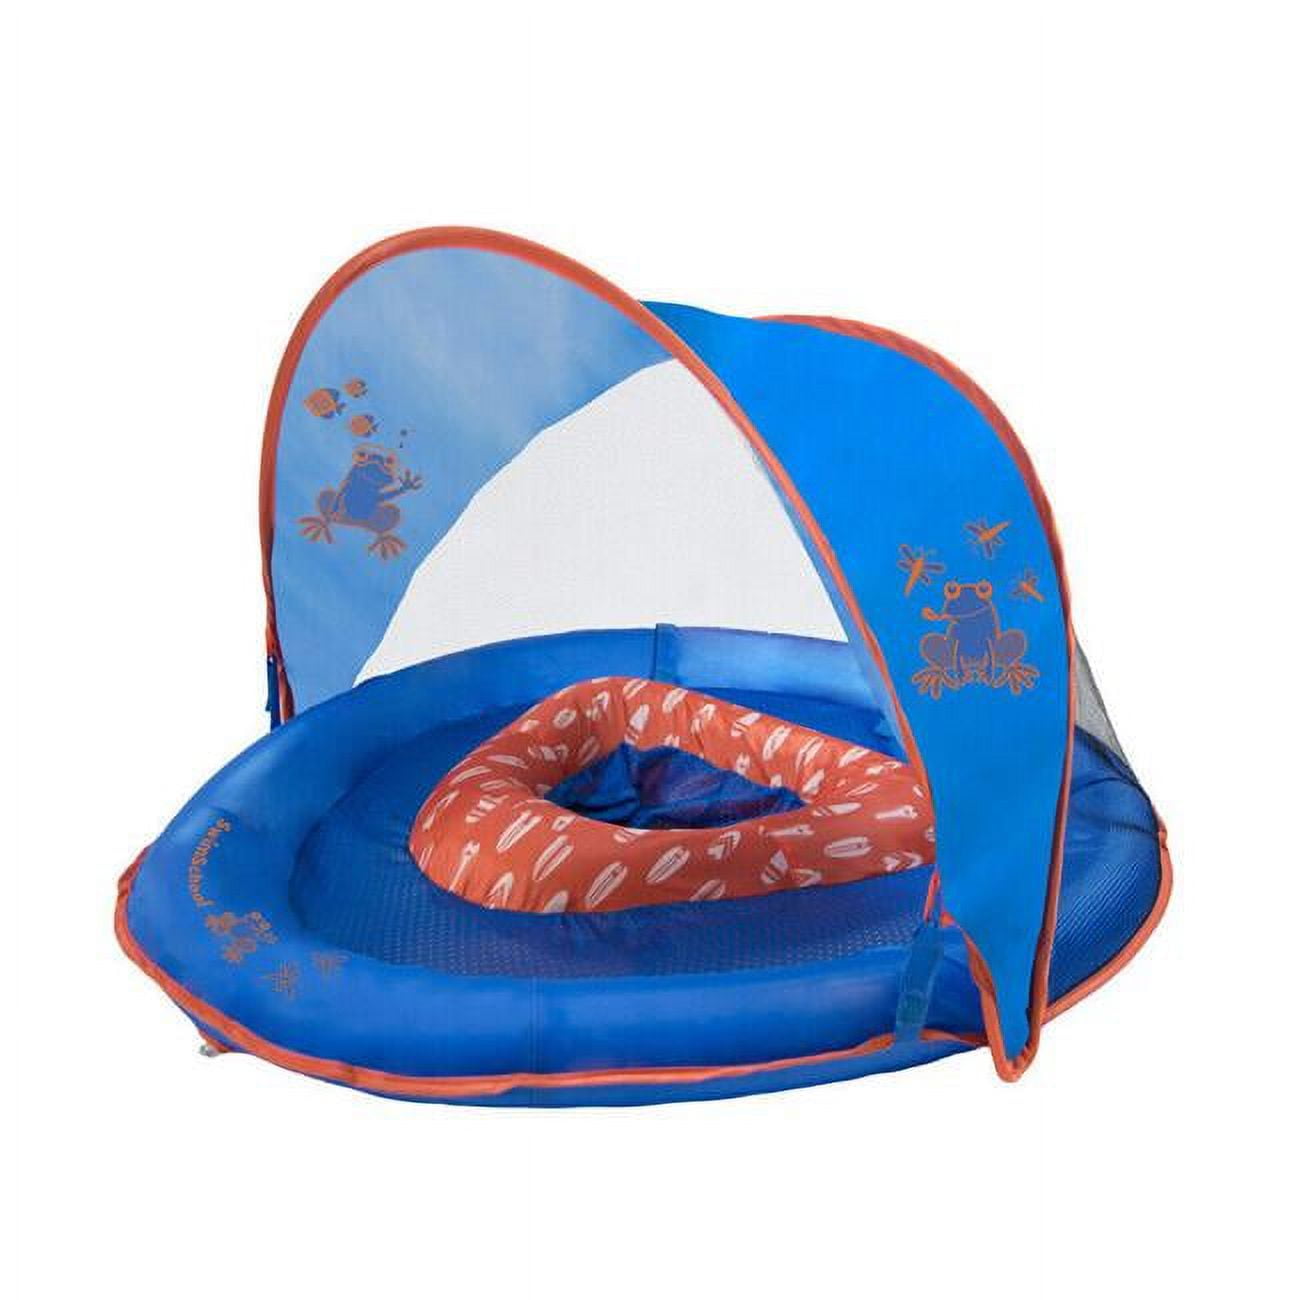 SSB17357A2 Swim School Assorted Polyester Inflatable Sun Shade Baby Float, Pink & Blue -  Aqua Leisure